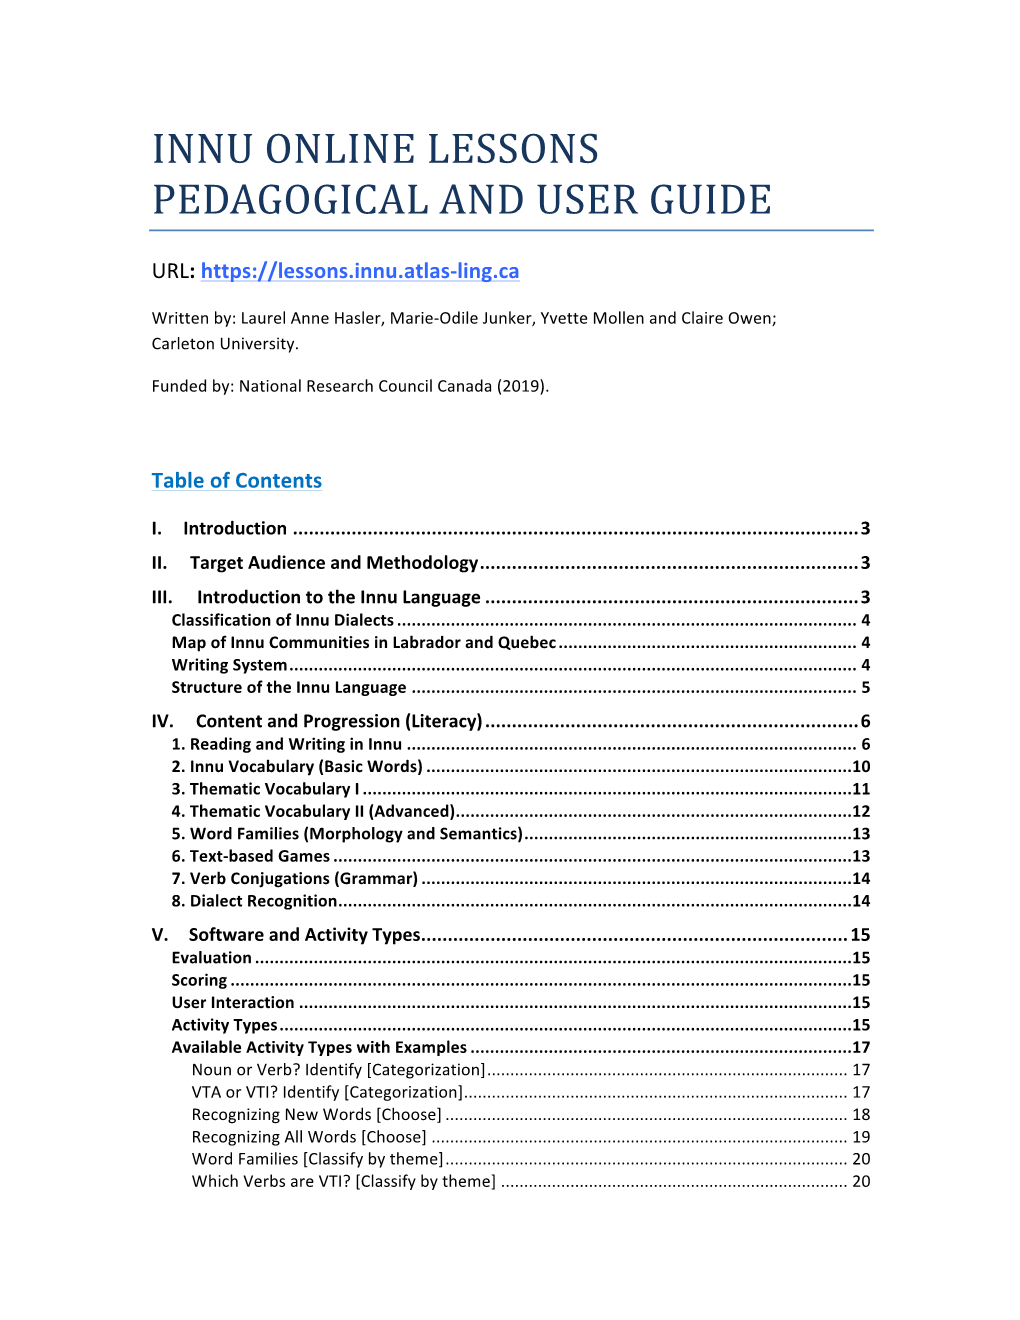 Innu Online Lessons Pedagogical and User Guide